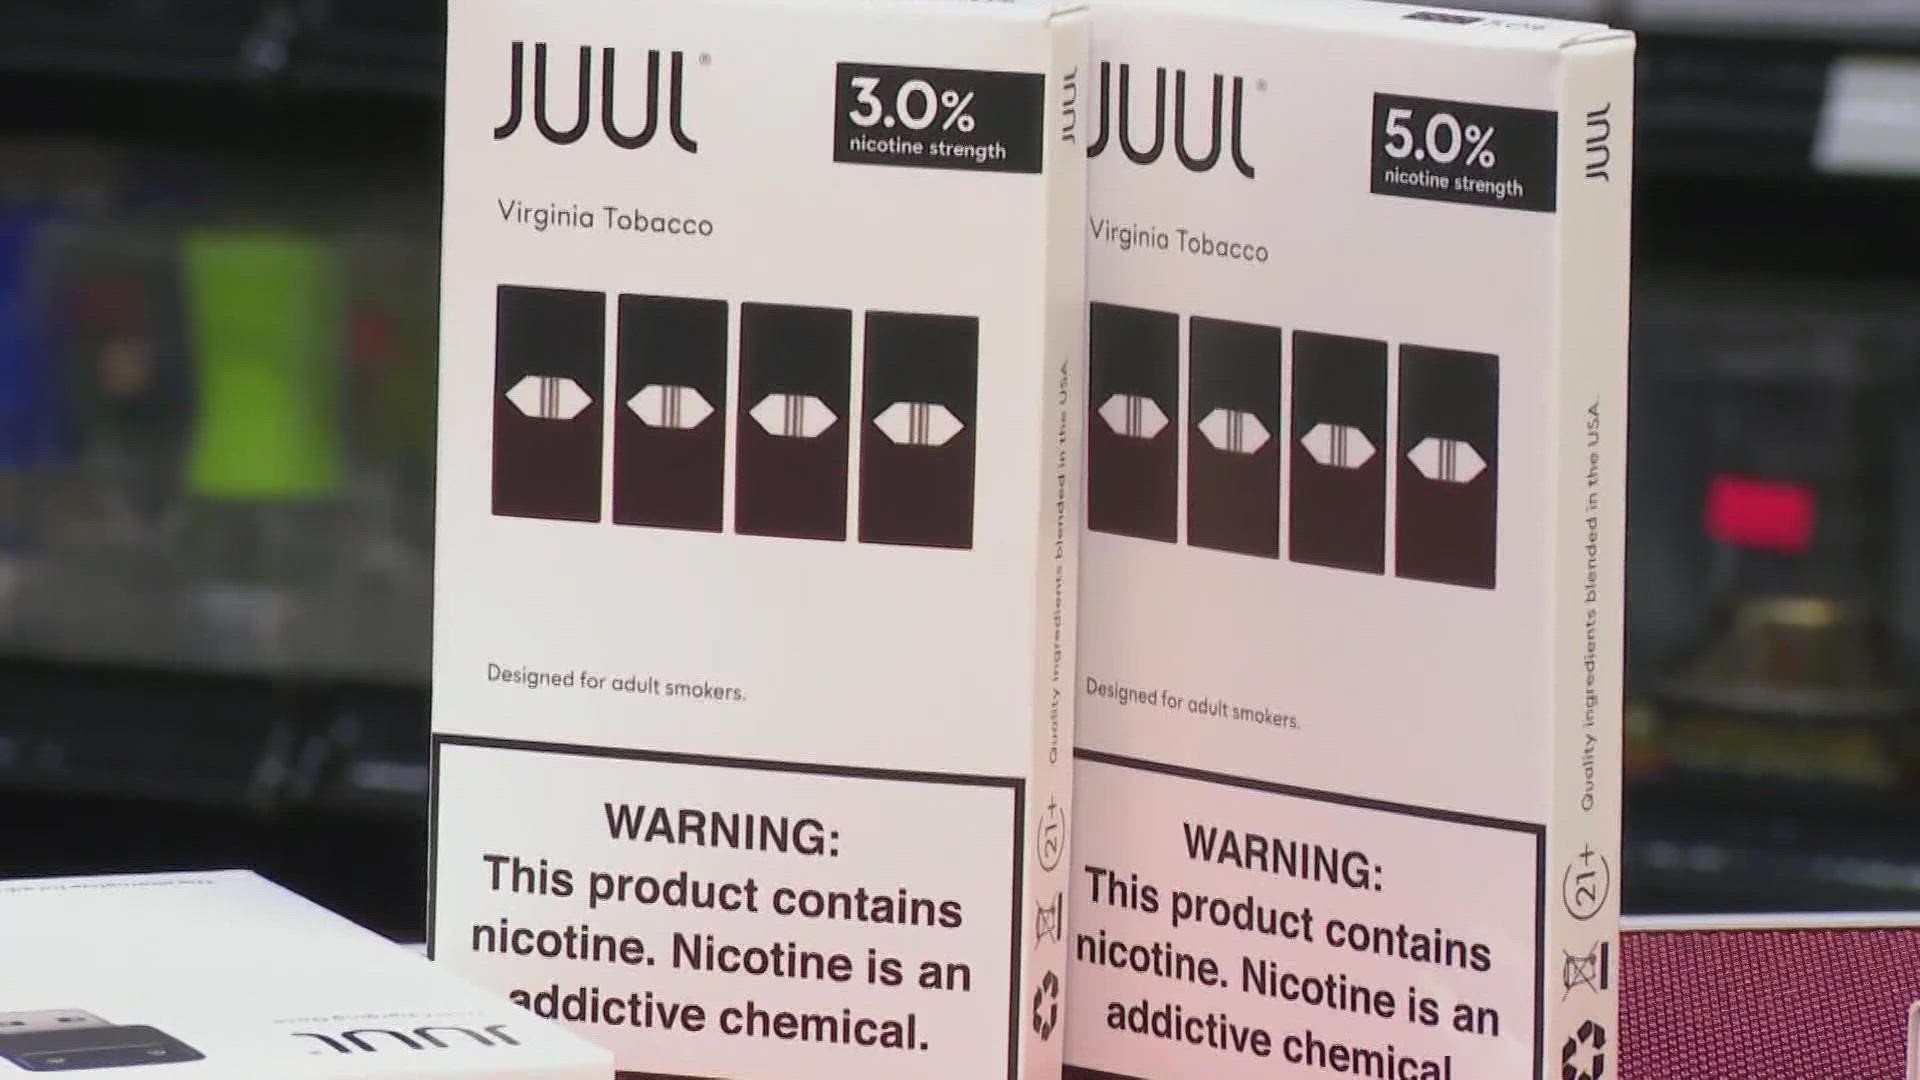 The announcement is part of a sweeping regulatory review of e-cigarettes which faced little regulation until recently.